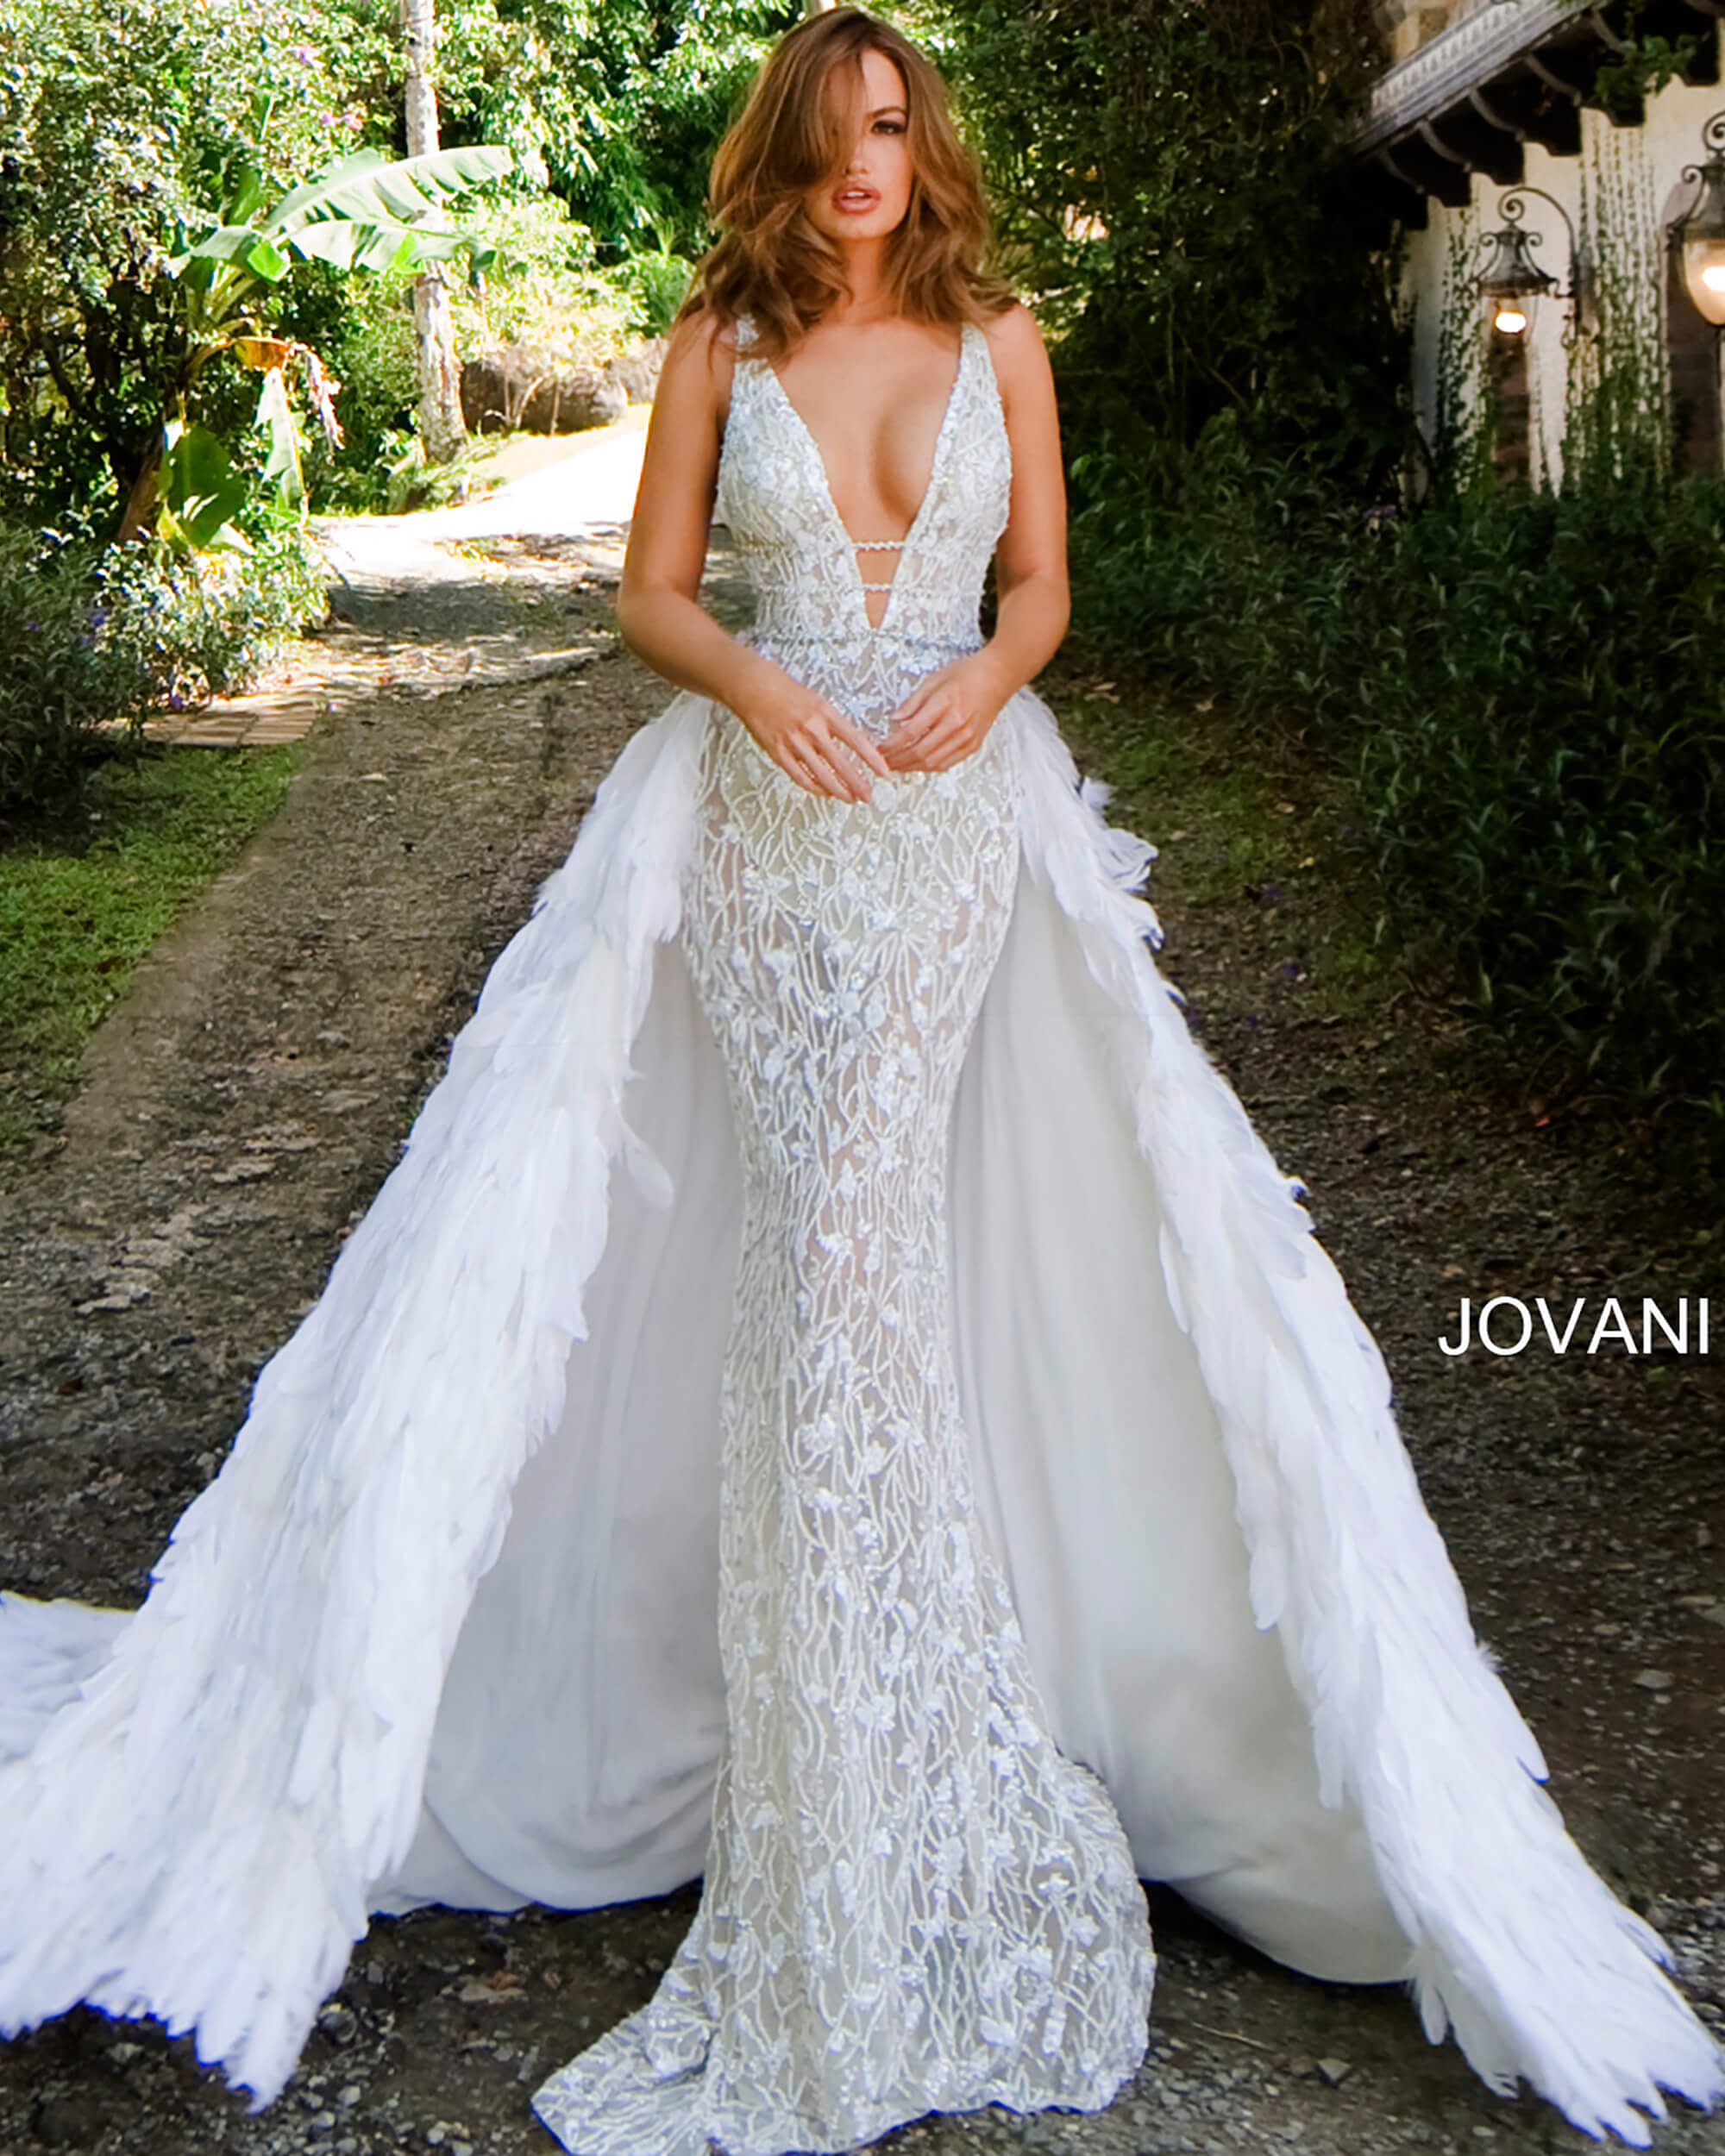 Jovani S62942 Plunging Neck Embellished Couture Gown